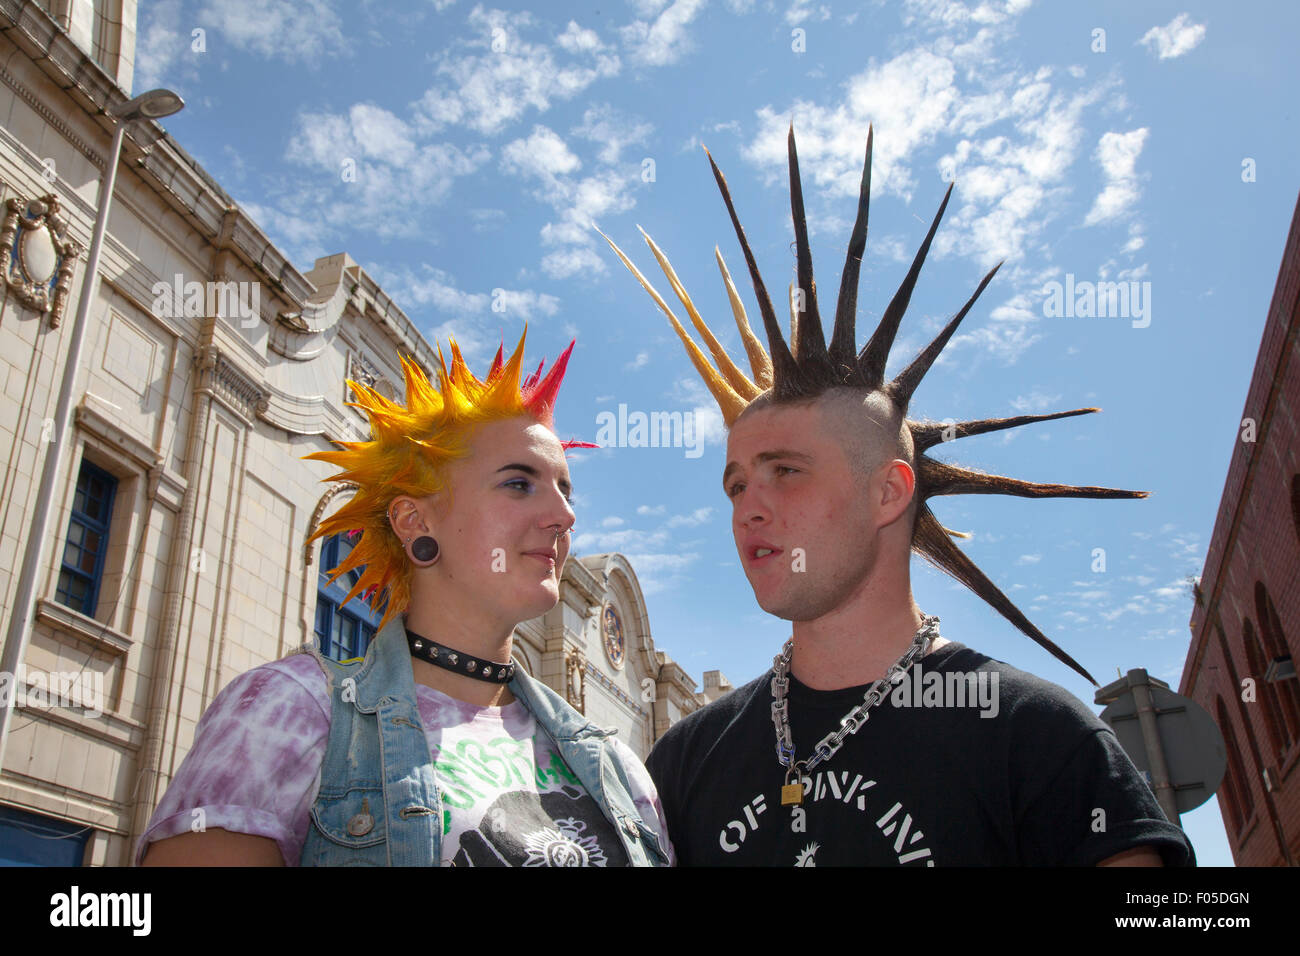 Two Punks with dyed hair, Mohawk Liberty spikes mohican hairstyle at Blackpool, Lancashire, UK. Aug, 2015. Punk Rebellion festival at The Winter Gardens. A couple clash cultures at the famous seaside town of Blackpool as punks attending the annual Rebellion festival at the Winter Gardens come shoulder to shoulder with traditional holidaymakers.  Credit: MediaWorldImages/Alamy Live News Stock Photo